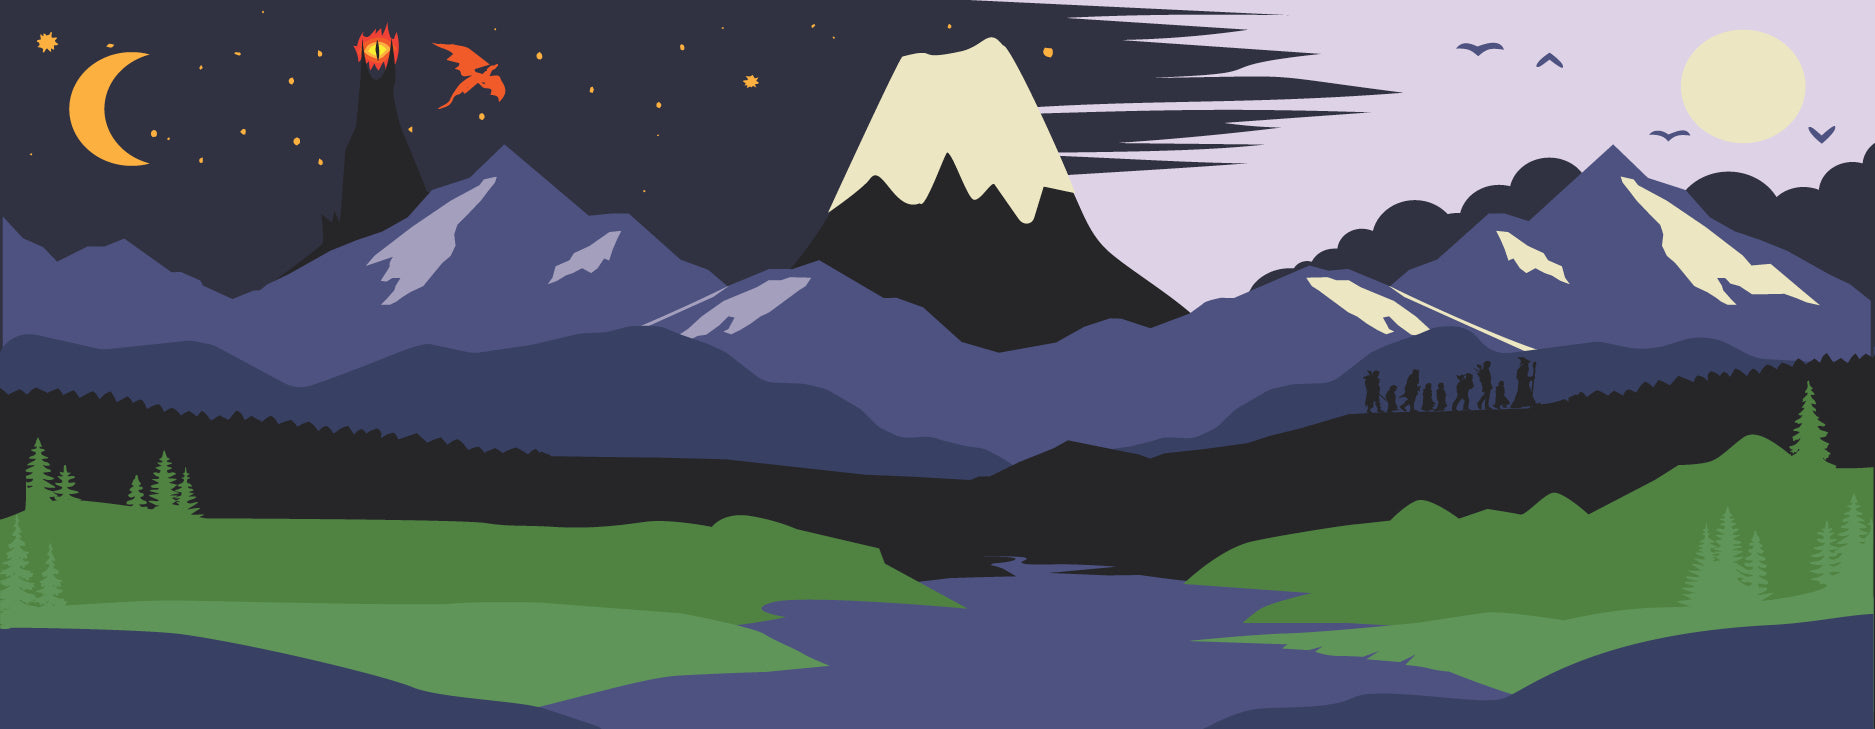 illustration in purple, dark navy and green hues of a river leading up to a tall snow capped mountain. On the left is the eye of Sauron with a dragon flying around it. on the right the fellowship walk up a mountain with birds and sun in the sky